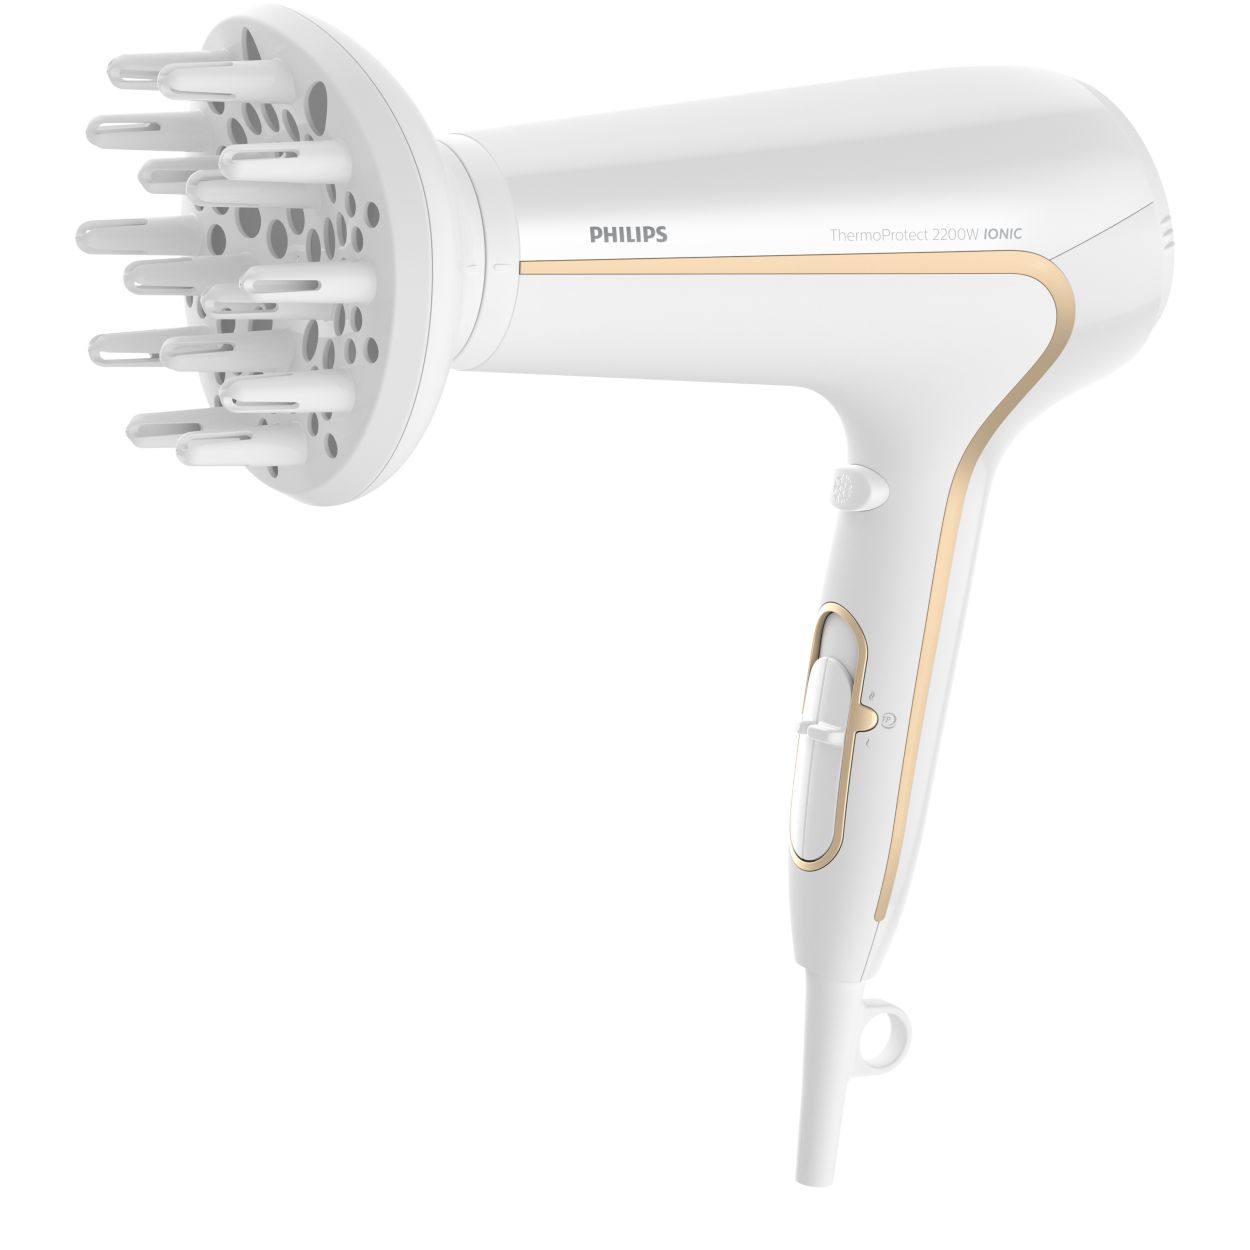 Philips DryCare Advanced Hair Dryer 2200W - HP8232/00 Philips